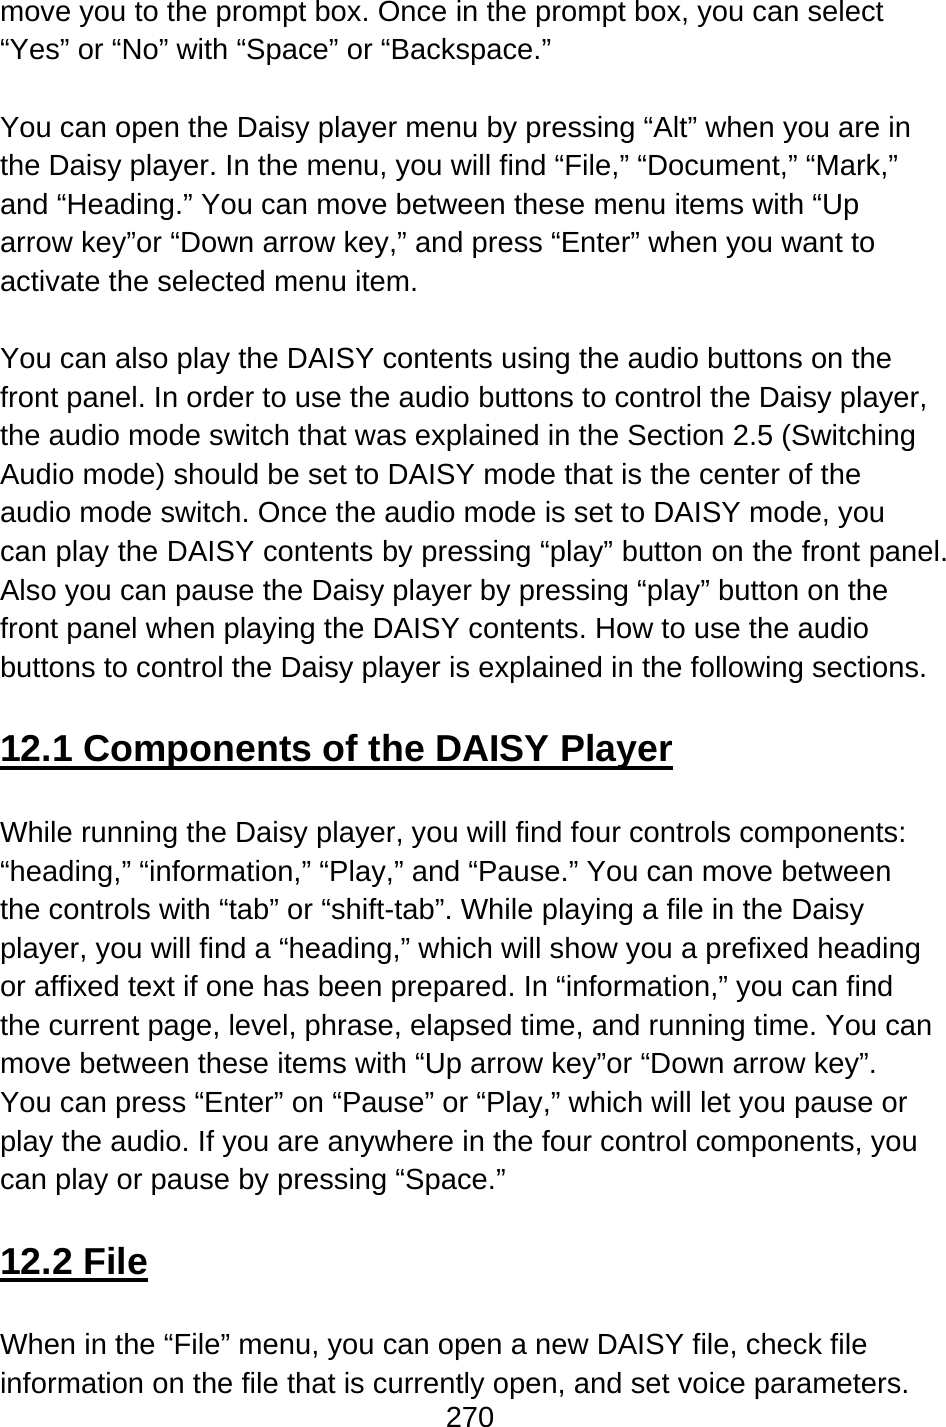 270  move you to the prompt box. Once in the prompt box, you can select “Yes” or “No” with “Space” or “Backspace.”  You can open the Daisy player menu by pressing “Alt” when you are in the Daisy player. In the menu, you will find “File,” “Document,” “Mark,” and “Heading.” You can move between these menu items with “Up arrow key”or “Down arrow key,” and press “Enter” when you want to activate the selected menu item.  You can also play the DAISY contents using the audio buttons on the front panel. In order to use the audio buttons to control the Daisy player, the audio mode switch that was explained in the Section 2.5 (Switching Audio mode) should be set to DAISY mode that is the center of the audio mode switch. Once the audio mode is set to DAISY mode, you can play the DAISY contents by pressing “play” button on the front panel. Also you can pause the Daisy player by pressing “play” button on the front panel when playing the DAISY contents. How to use the audio buttons to control the Daisy player is explained in the following sections.  12.1 Components of the DAISY Player  While running the Daisy player, you will find four controls components: “heading,” “information,” “Play,” and “Pause.” You can move between the controls with “tab” or “shift-tab”. While playing a file in the Daisy player, you will find a “heading,” which will show you a prefixed heading or affixed text if one has been prepared. In “information,” you can find the current page, level, phrase, elapsed time, and running time. You can move between these items with “Up arrow key”or “Down arrow key”.   You can press “Enter” on “Pause” or “Play,” which will let you pause or play the audio. If you are anywhere in the four control components, you can play or pause by pressing “Space.”  12.2 File  When in the “File” menu, you can open a new DAISY file, check file information on the file that is currently open, and set voice parameters.   